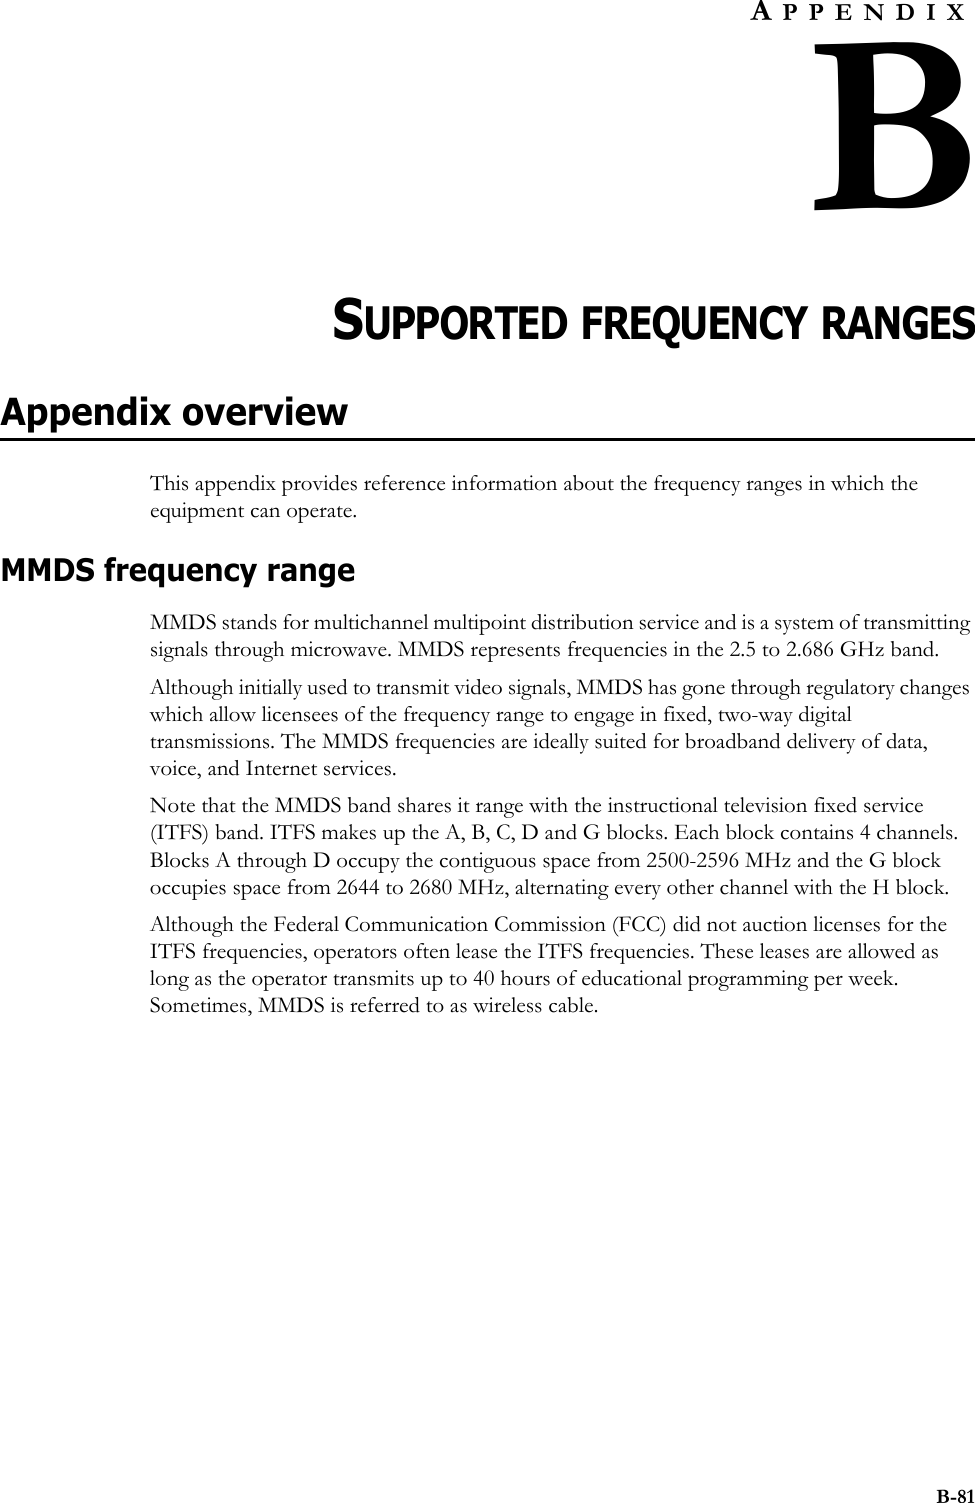 B-81APPENDIXBCHAPTER 0SUPPORTED FREQUENCY RANGESAppendix overviewThis appendix provides reference information about the frequency ranges in which the equipment can operate. MMDS frequency rangeMMDS stands for multichannel multipoint distribution service and is a system of transmitting signals through microwave. MMDS represents frequencies in the 2.5 to 2.686 GHz band. Although initially used to transmit video signals, MMDS has gone through regulatory changes which allow licensees of the frequency range to engage in fixed, two-way digital transmissions. The MMDS frequencies are ideally suited for broadband delivery of data, voice, and Internet services. Note that the MMDS band shares it range with the instructional television fixed service (ITFS) band. ITFS makes up the A, B, C, D and G blocks. Each block contains 4 channels. Blocks A through D occupy the contiguous space from 2500-2596 MHz and the G block occupies space from 2644 to 2680 MHz, alternating every other channel with the H block. Although the Federal Communication Commission (FCC) did not auction licenses for the ITFS frequencies, operators often lease the ITFS frequencies. These leases are allowed as long as the operator transmits up to 40 hours of educational programming per week. Sometimes, MMDS is referred to as wireless cable.